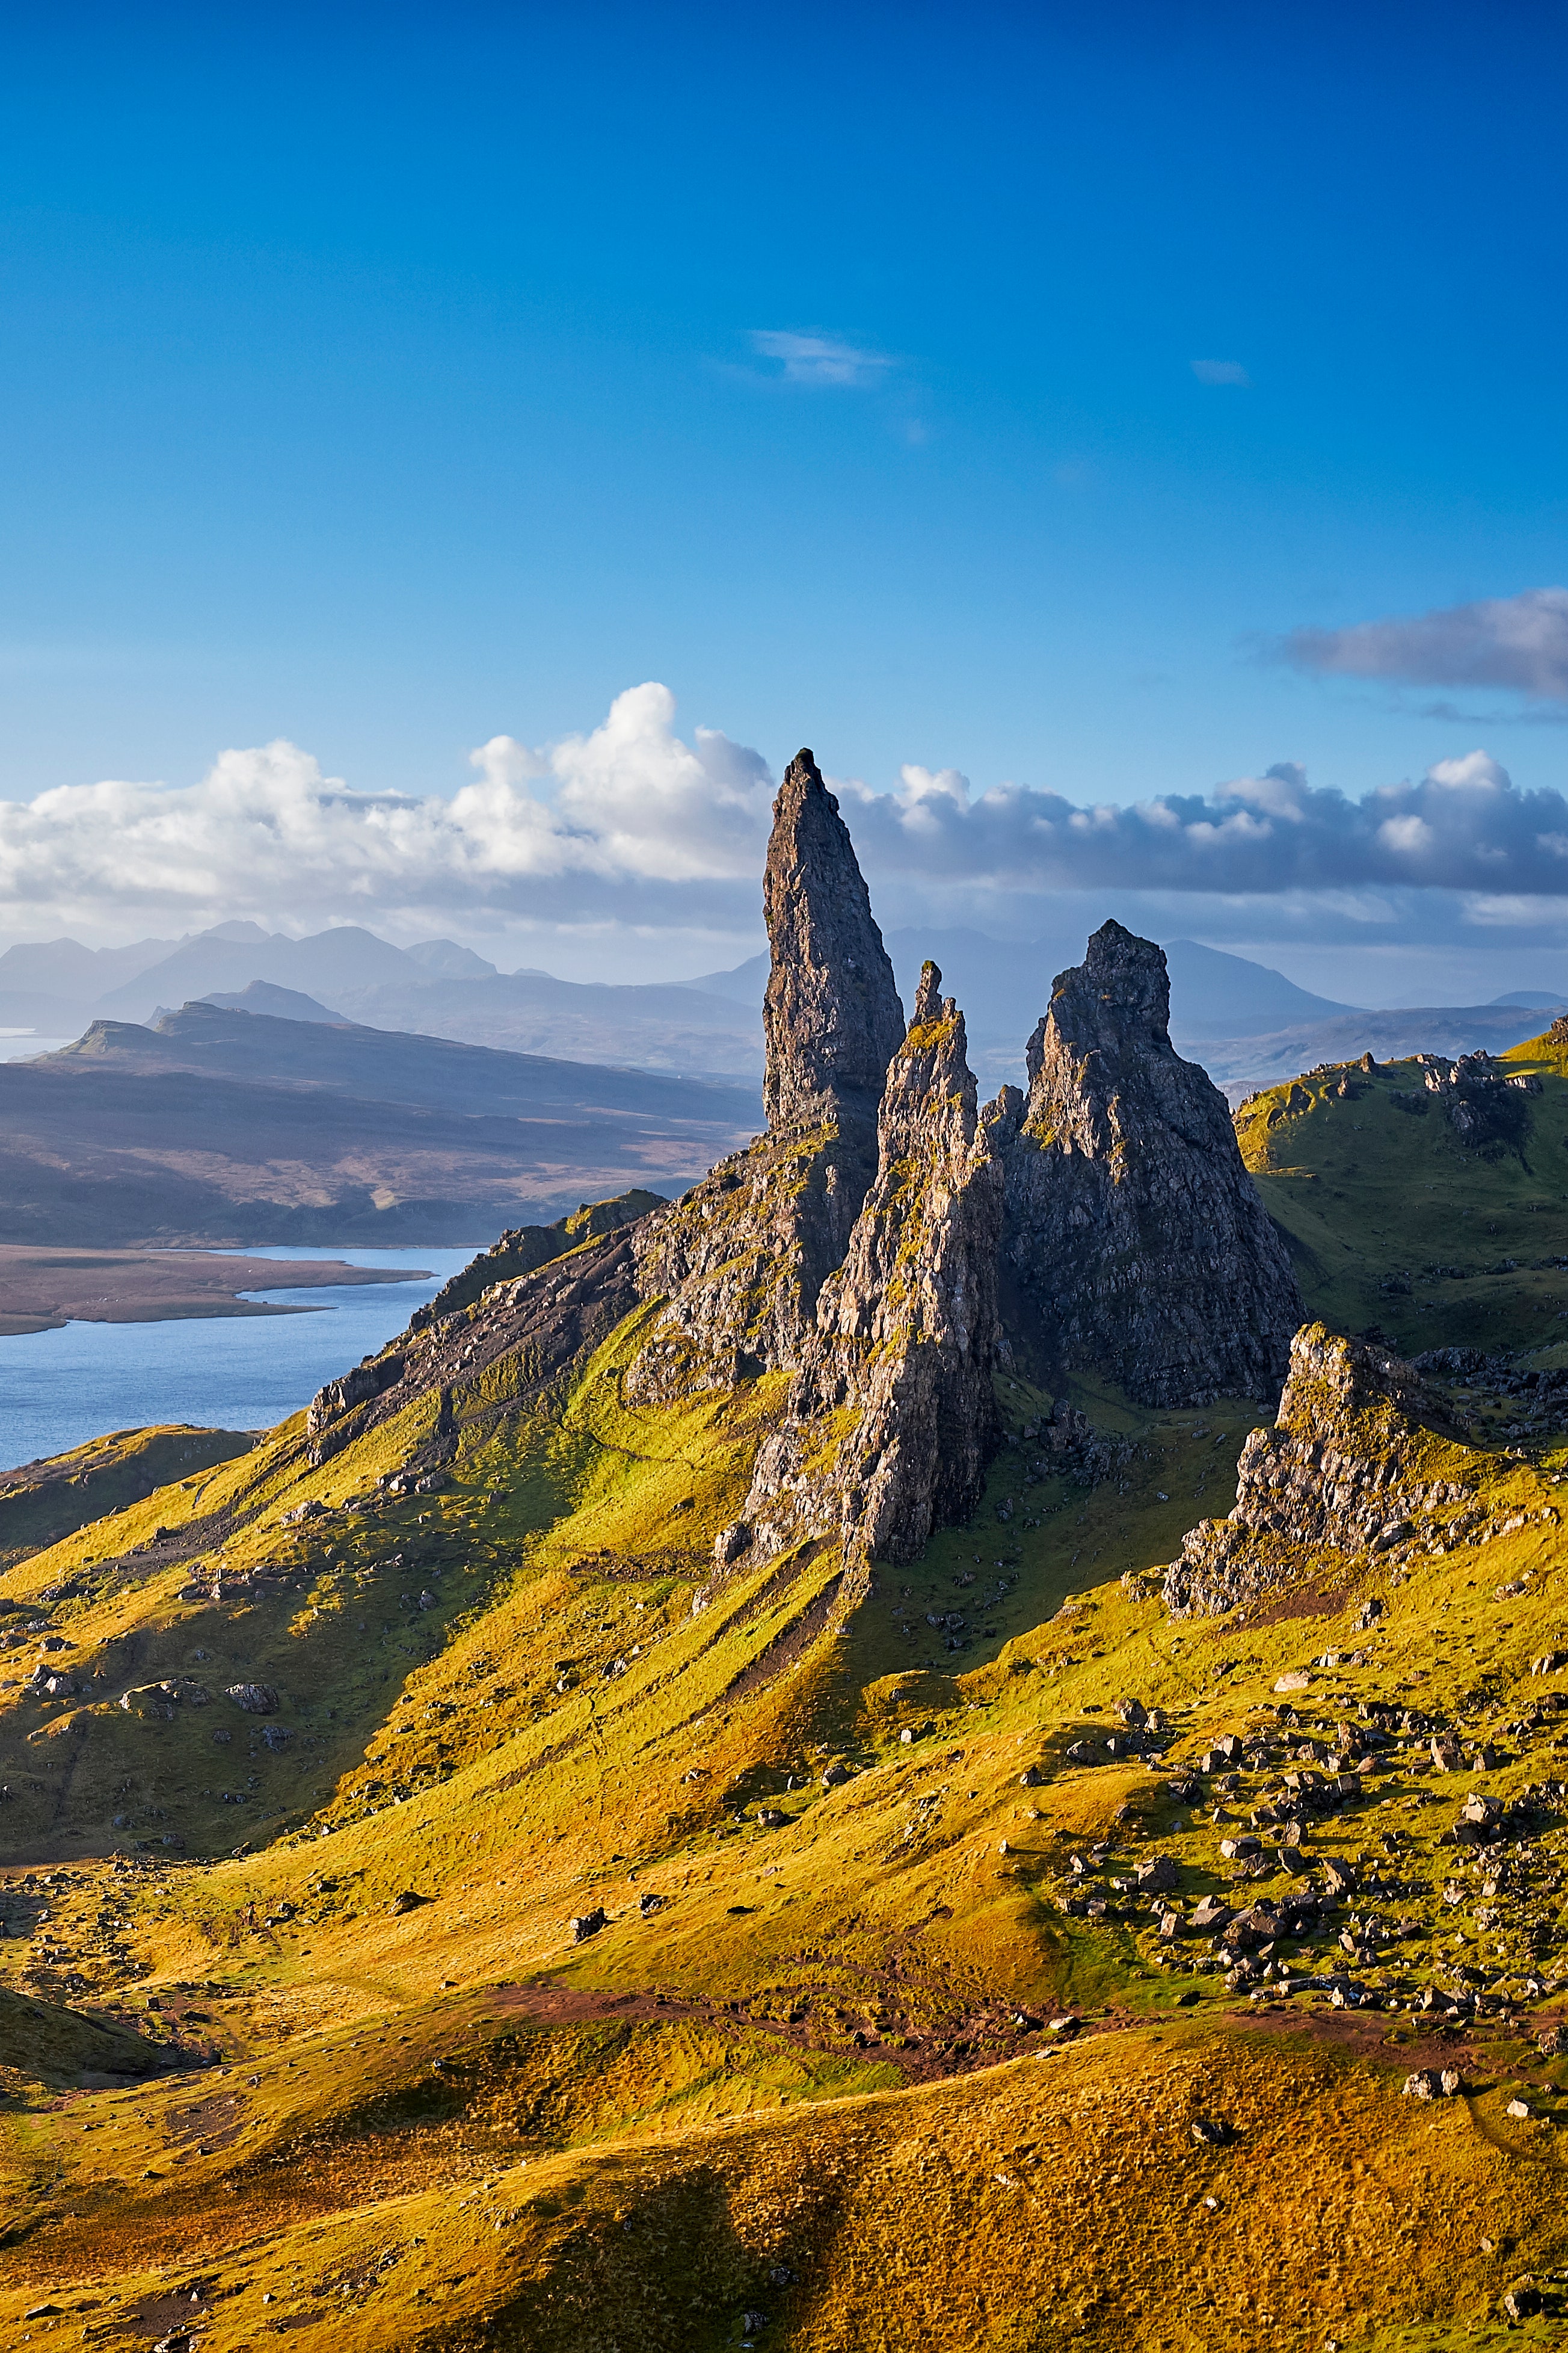 Now Is Exactly The Right Time To Head To The Isle Of Skye – Here’s Why